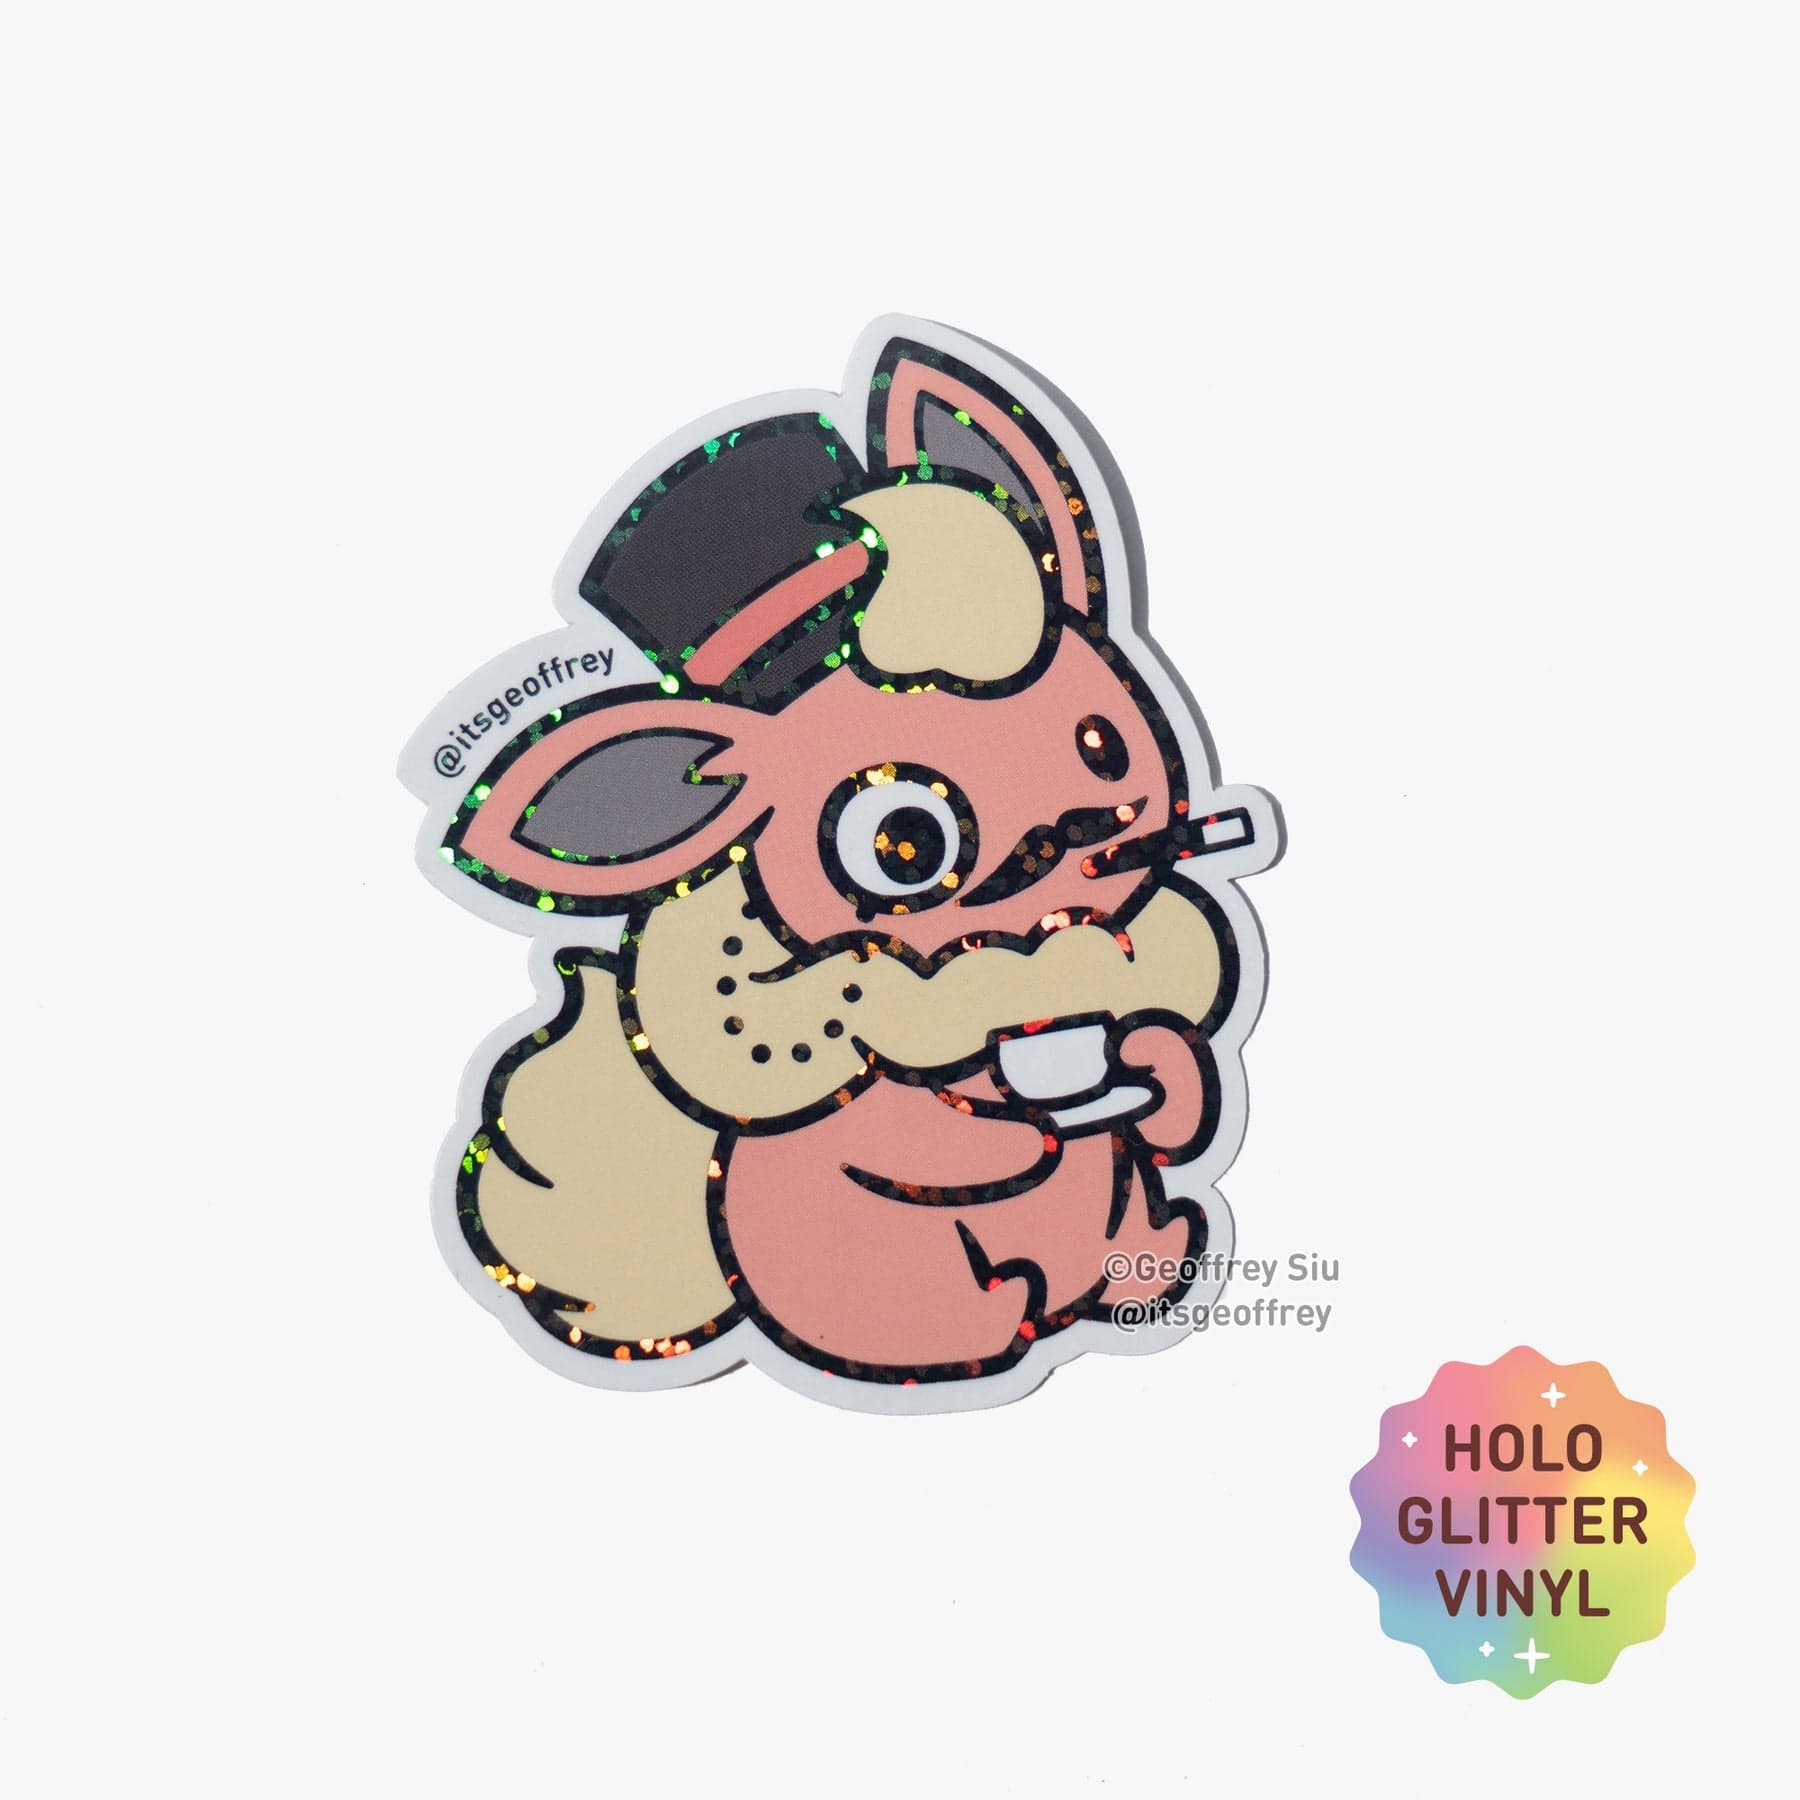 Cute and Kawaii Eeveelution Pokemon Stickers for Boys and Girls of All Ages